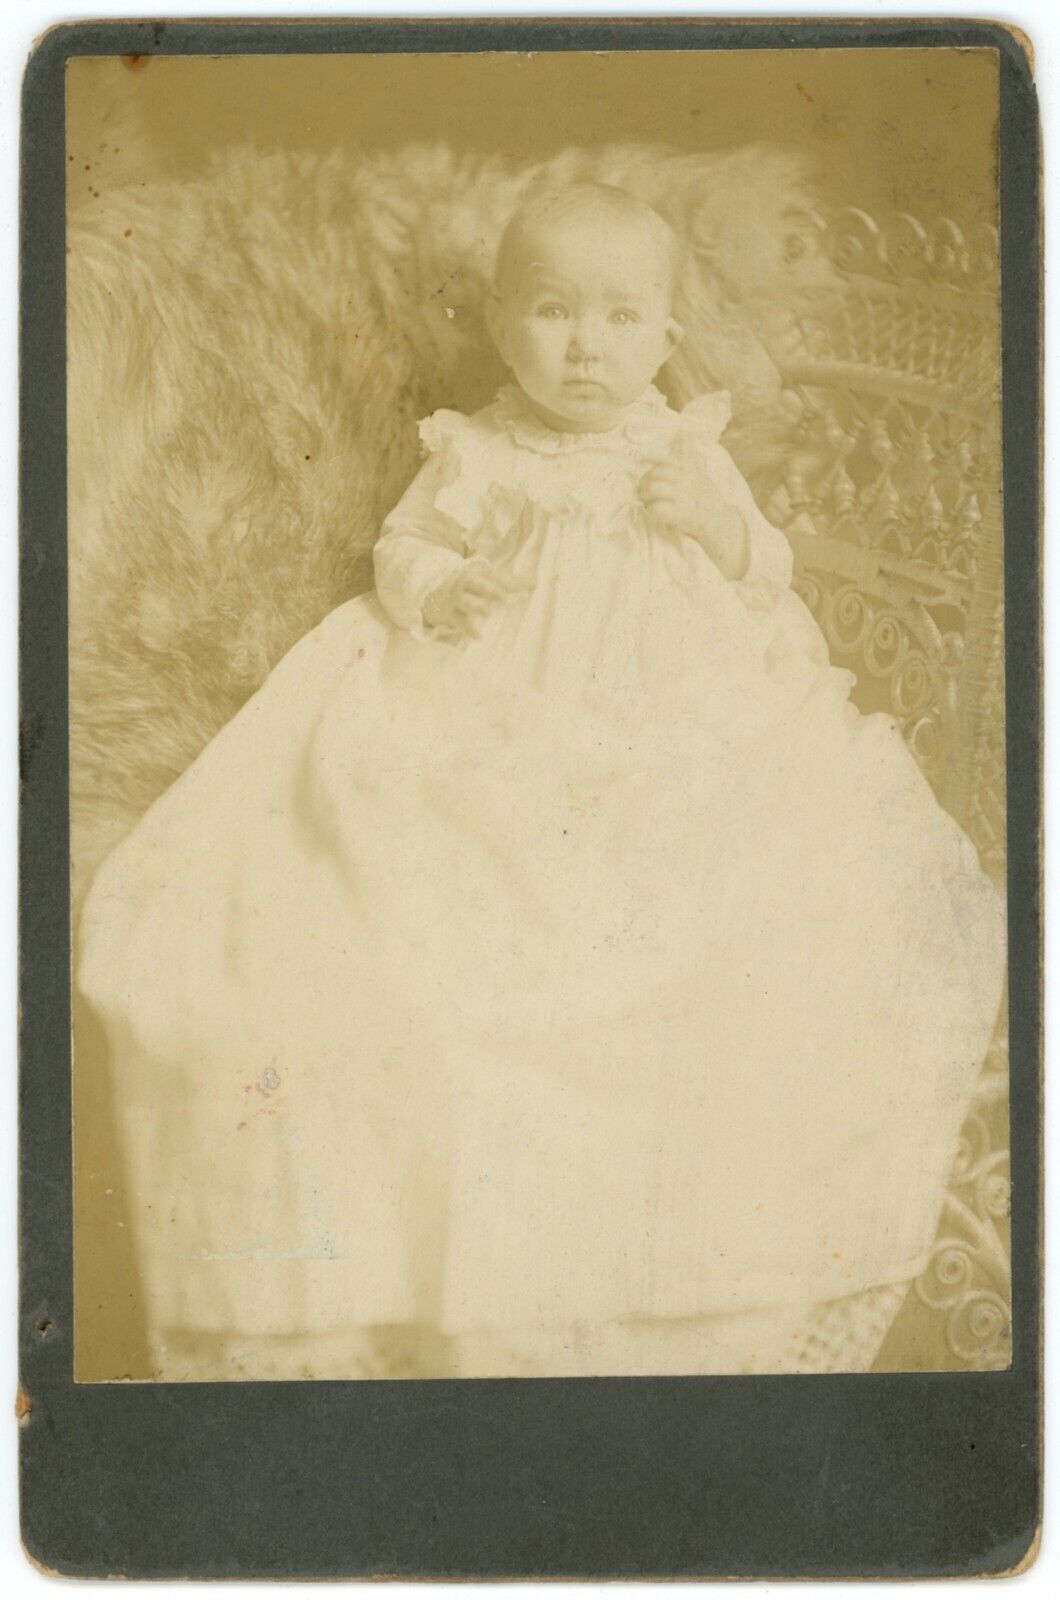 CIRCA 1890'S CABINET CARD Adorable Little Baby In White Dress J.B. Parsons